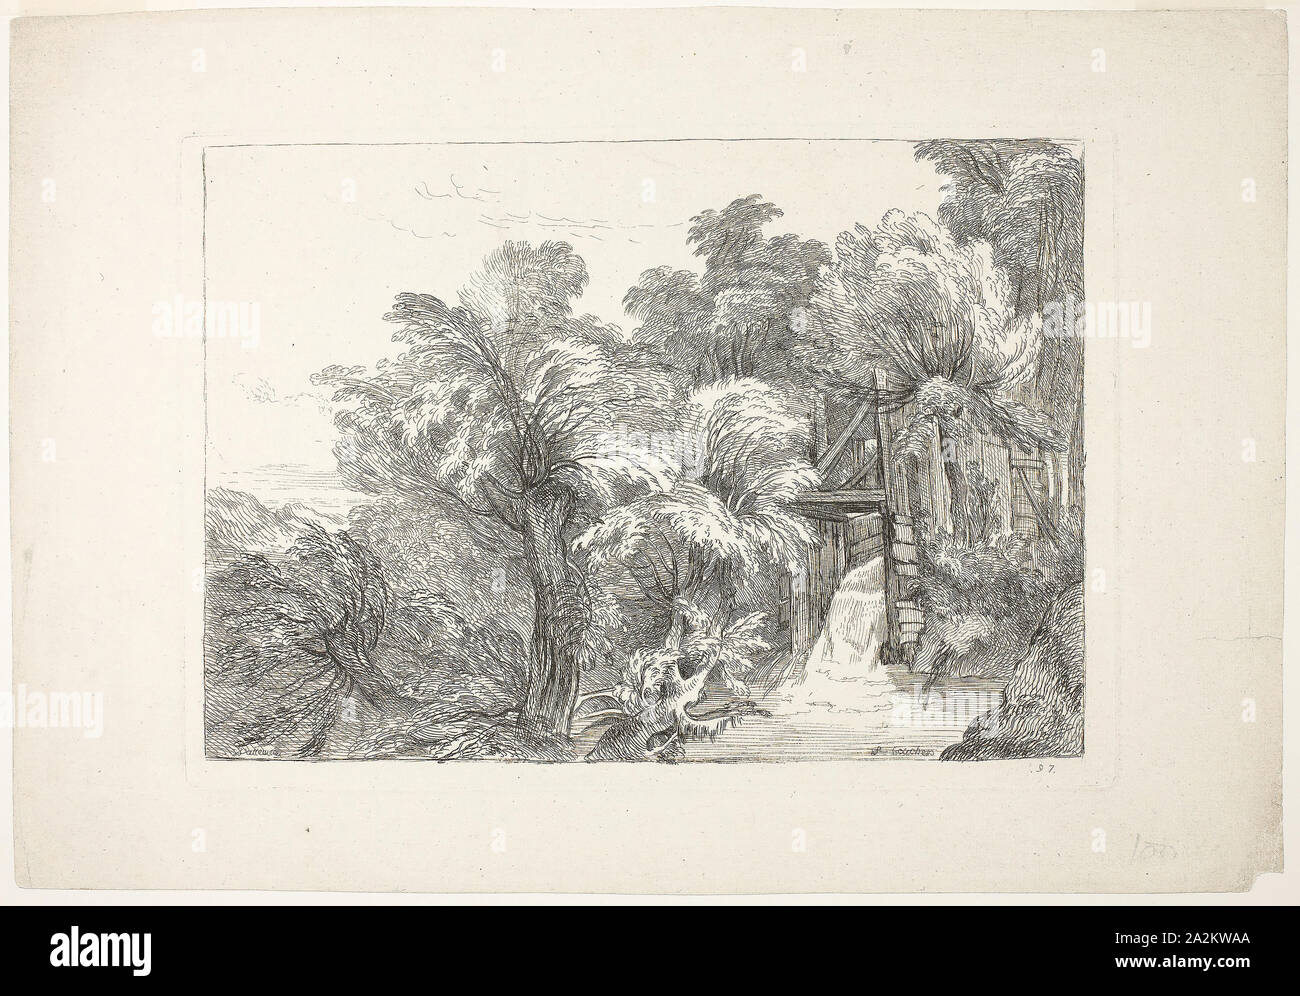 A Mill Lock in the Middle of Willows, plate 97 from Figures de différents caractères, de Paysages, et d’Etudes dessinées d’après nature (Figures of Different Characters, Landscapes, and Studies Drawn from Nature), 1726, François Boucher (French, 1703-1770), after Jean Antoine Watteau (French, 1684-1721), France, Etching on ivory laid paper, 215 × 308 mm (image), 230 × 328 mm (plate Stock Photo